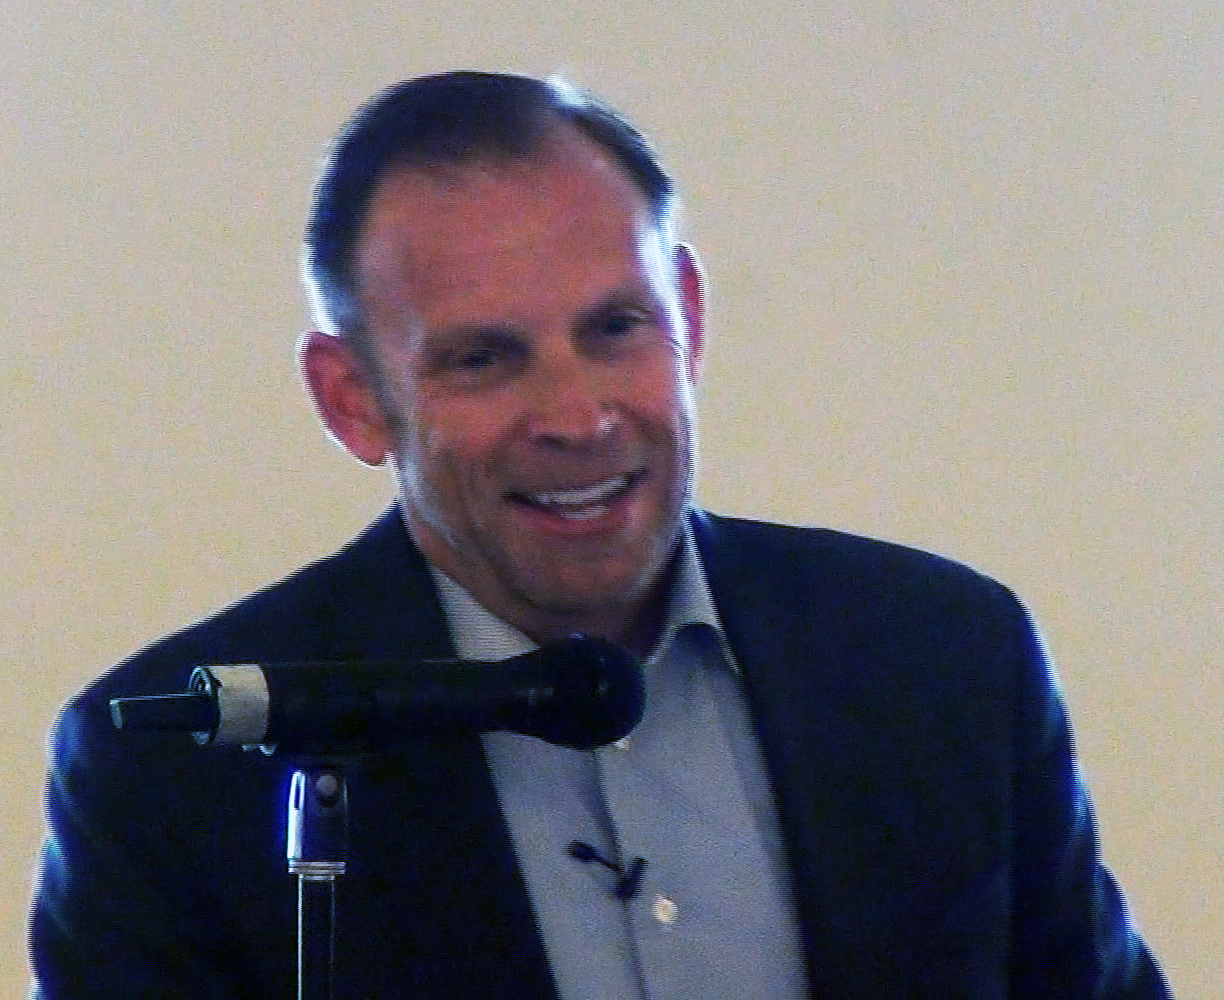 Brig Sorber, Executive Chairman of Two Men & A Truck